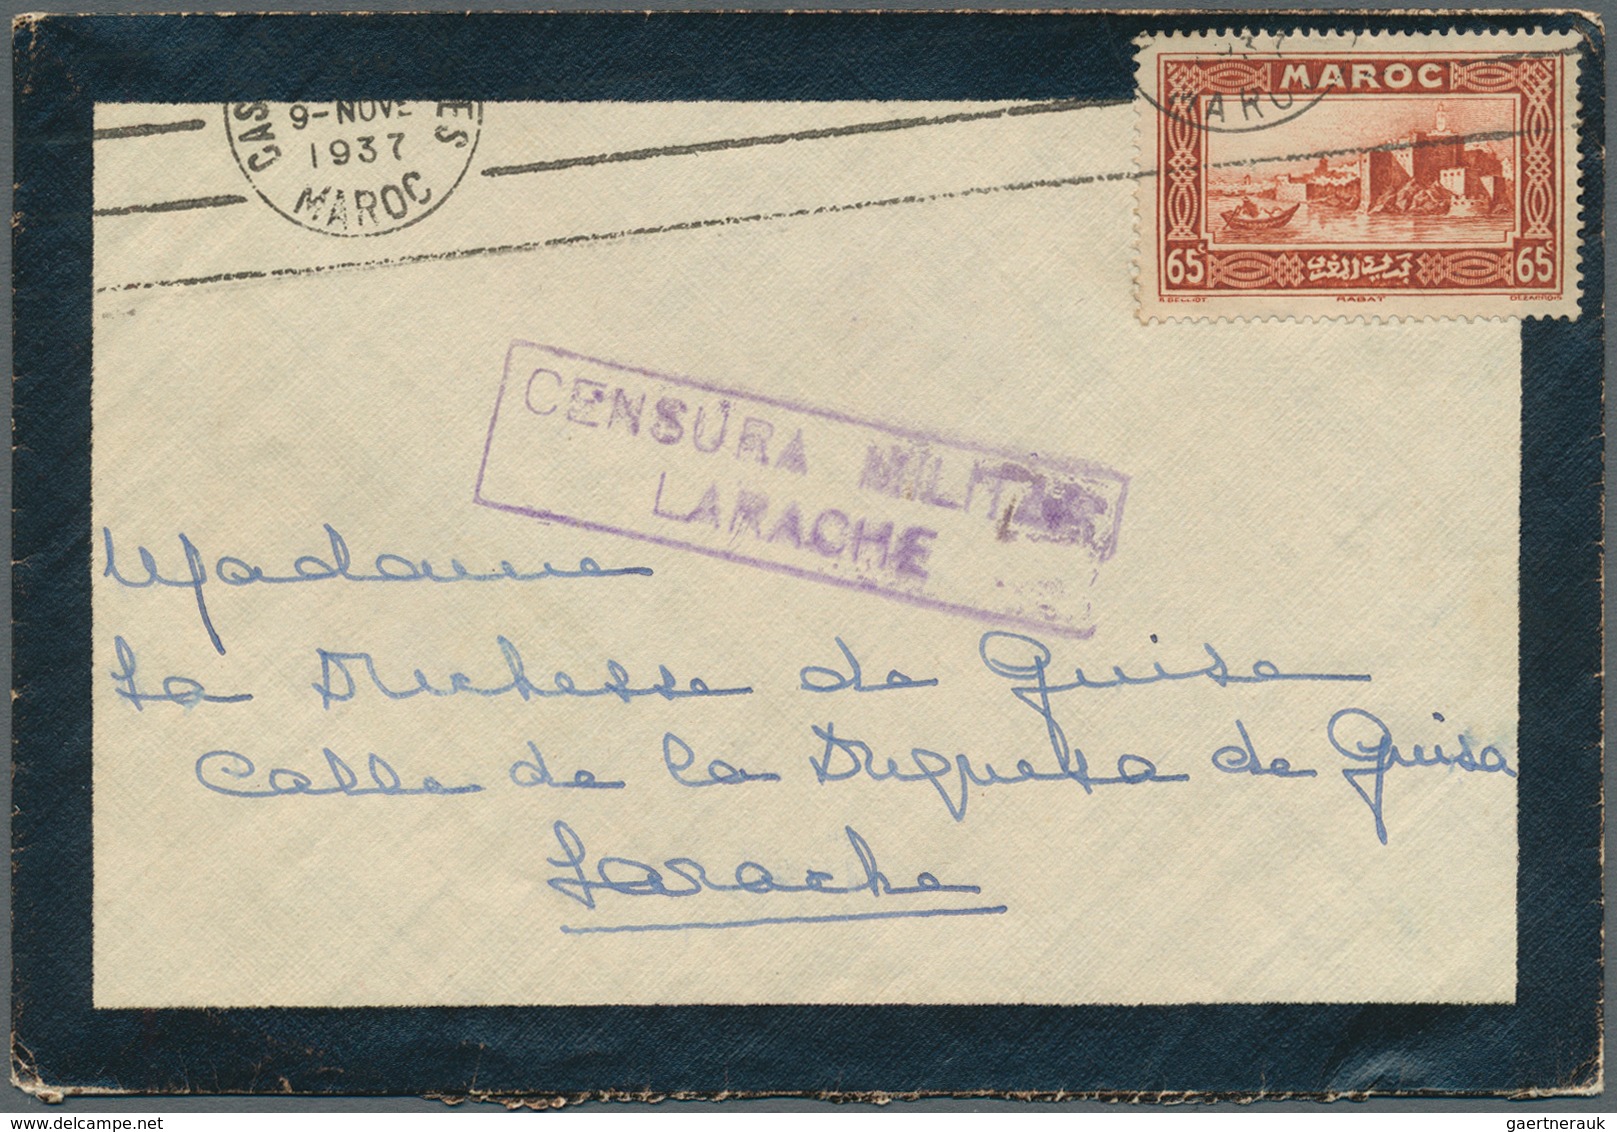 Spanien: 1843/1944: 29 envelopes, picture postcards and postal stationeries including censored mail,